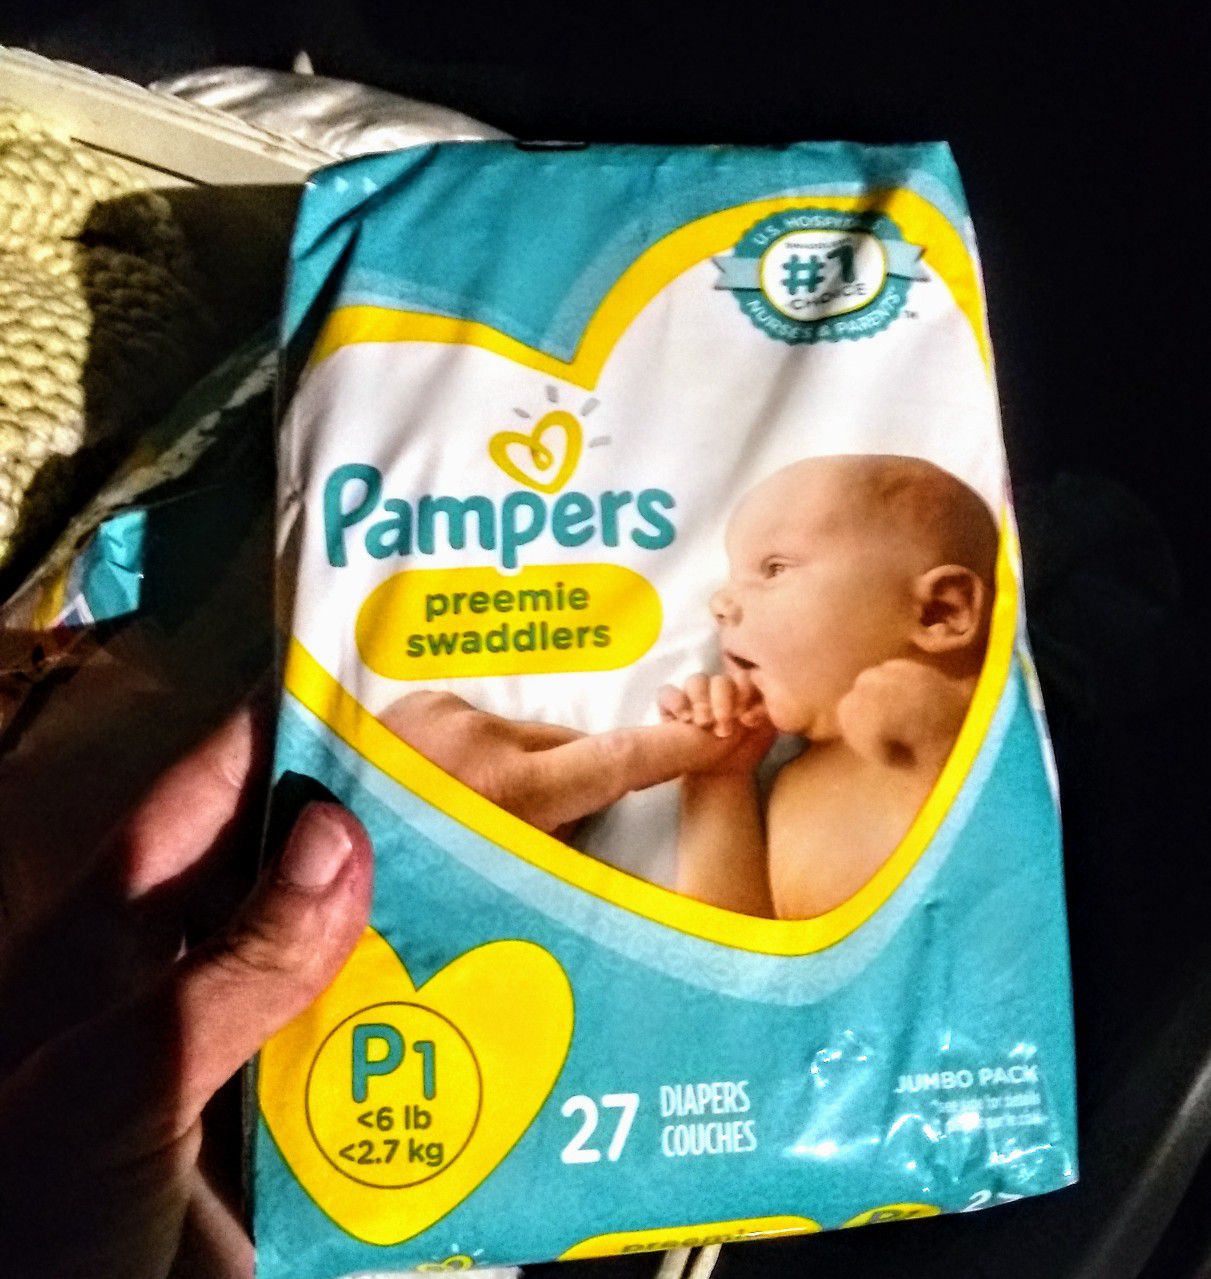 7 PACKS OF PAMPERS PREEMIE SWADDLERS BABY DIAPERS, ALSO a LARGE SIZE BAG SIZE OF PREEMIE DIAPERS. ESTIMATED 50+.